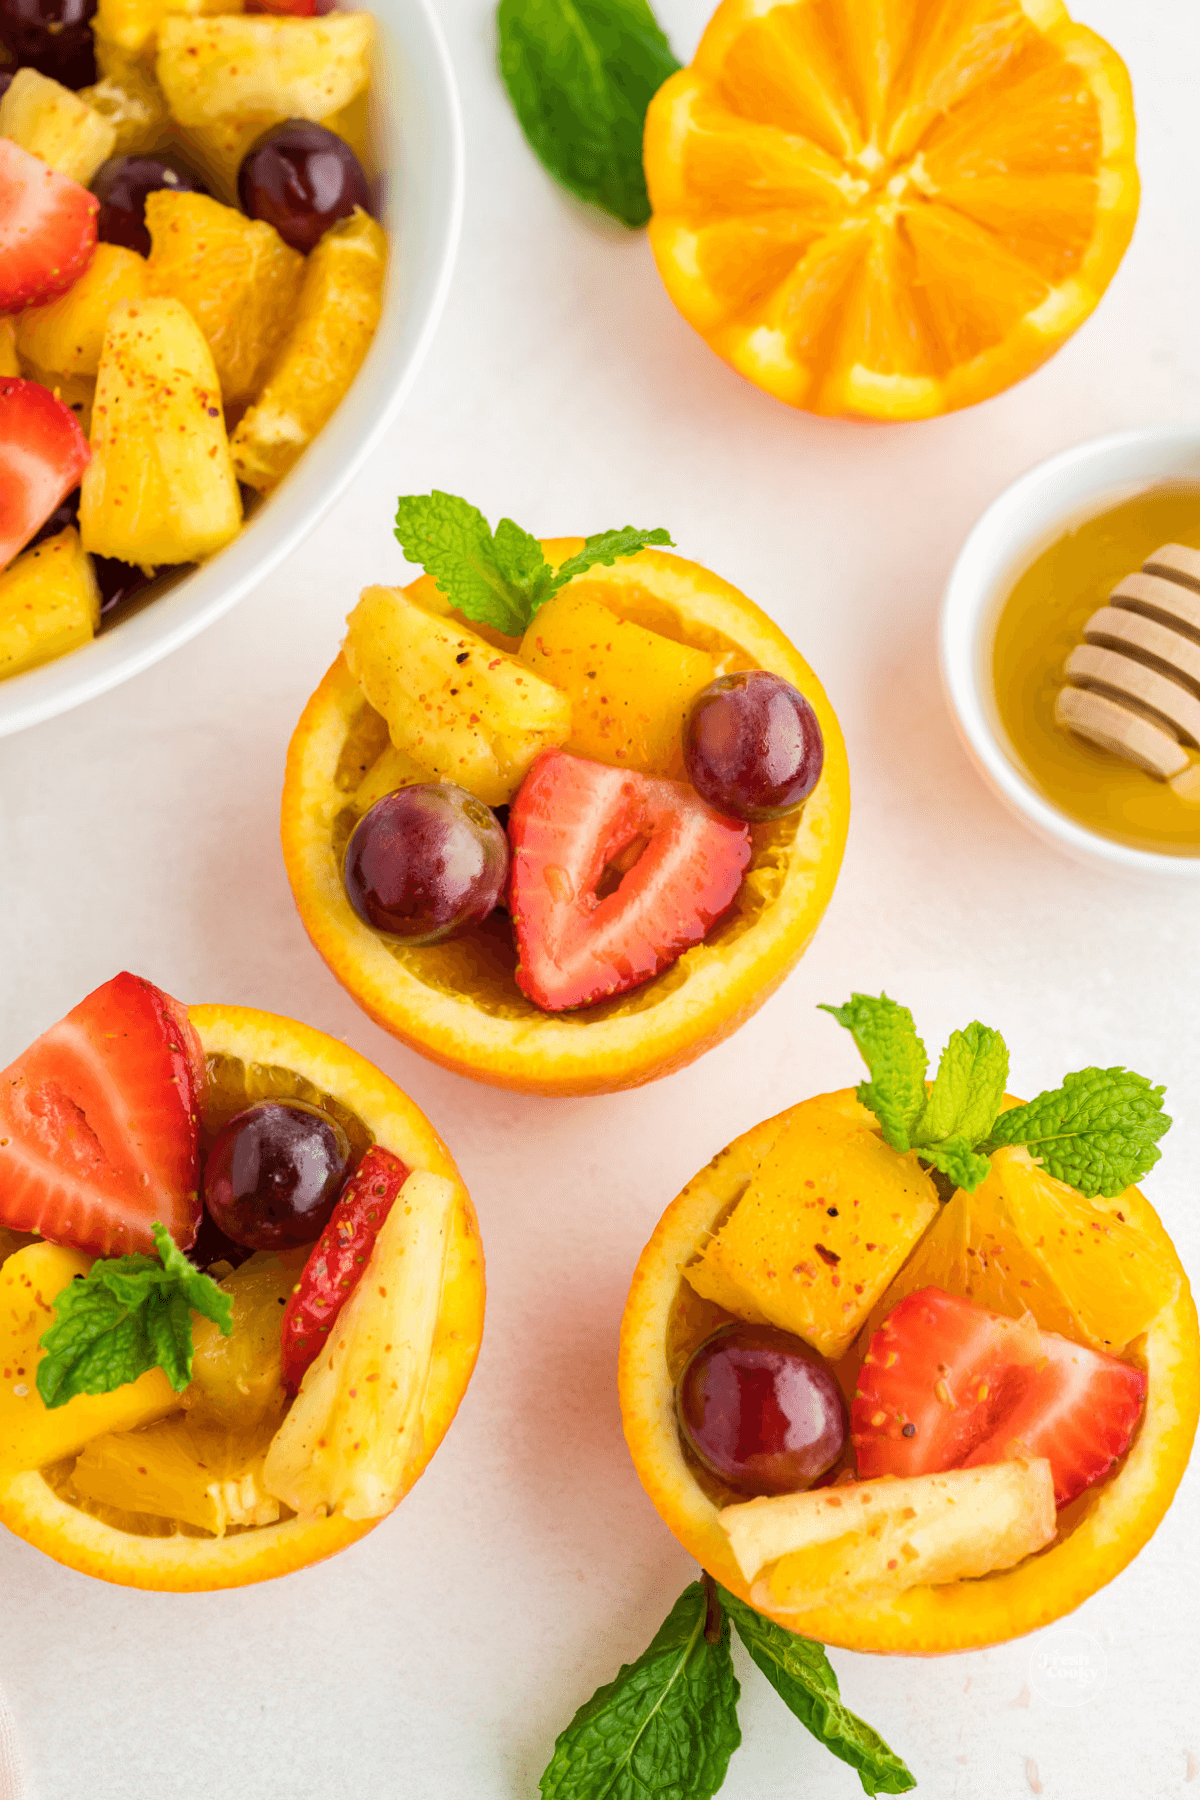 Spoon some fruit salad into orange fruit cups for a fun serving twist!